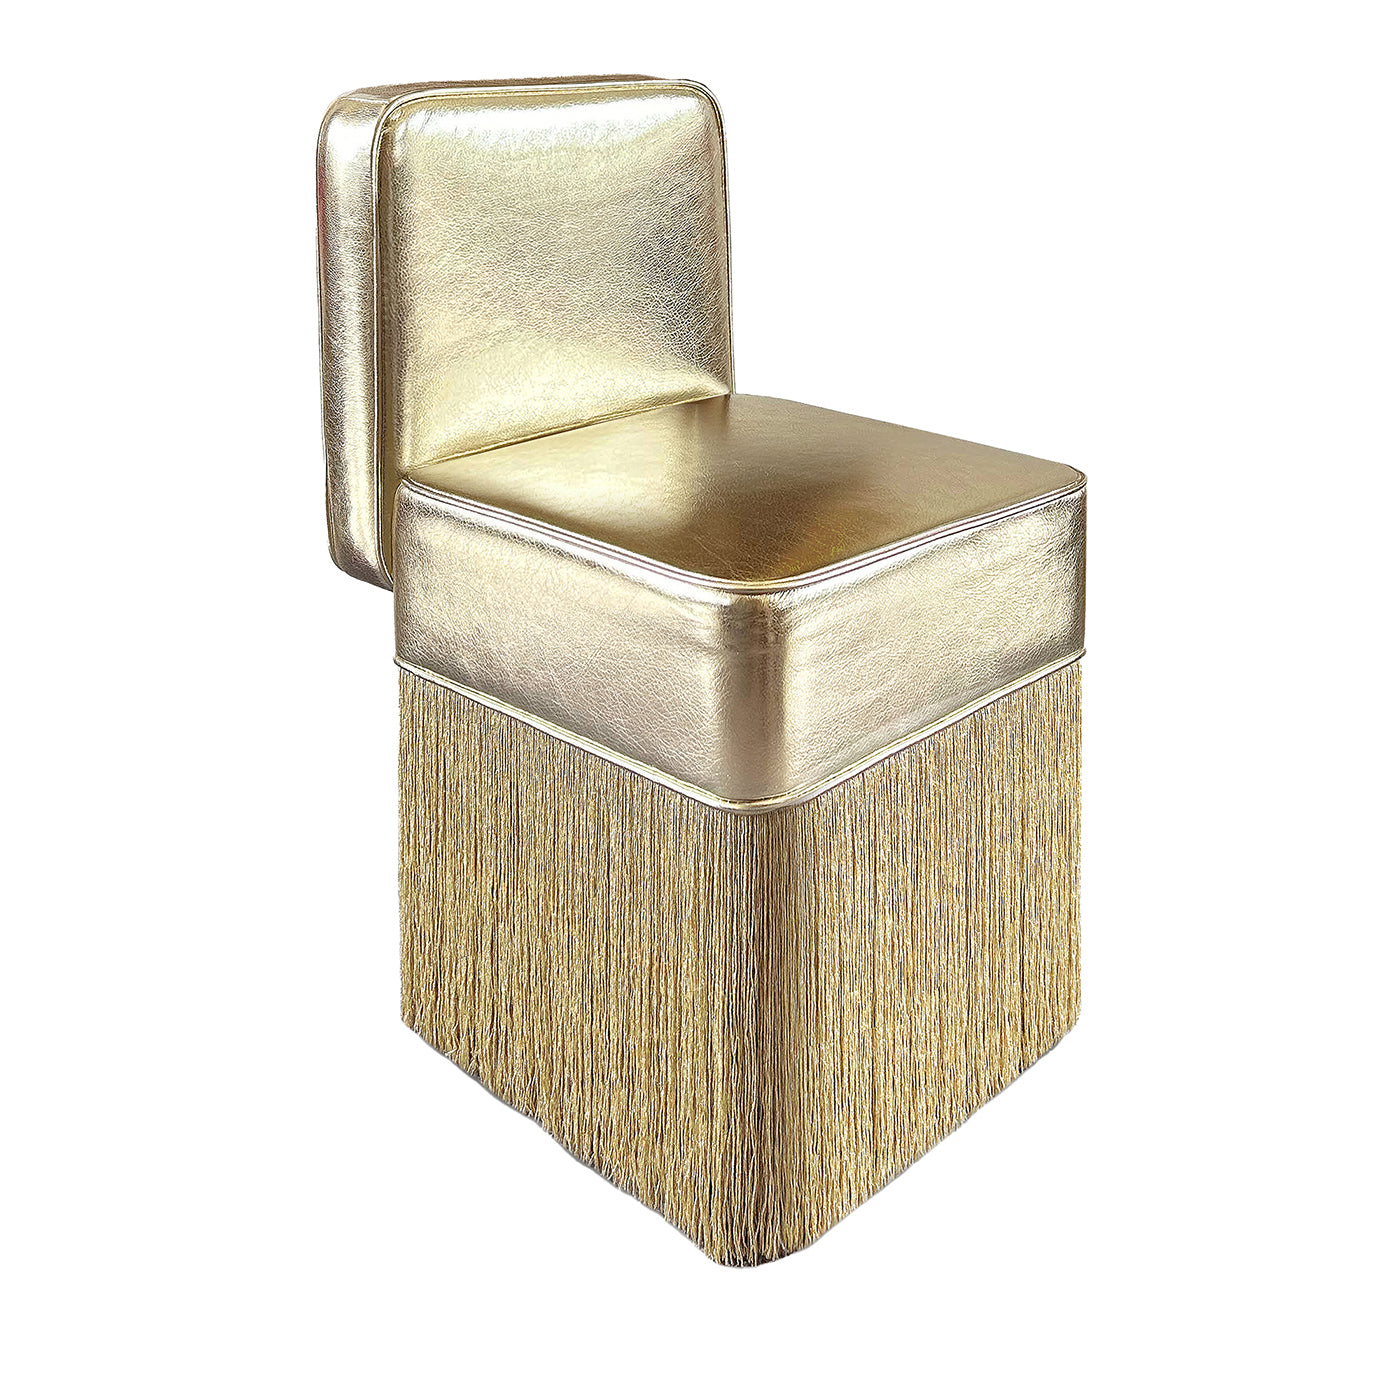 Lilli Gleaming Gold Metallic Leather with Lurex Fringes Armchair - Main view